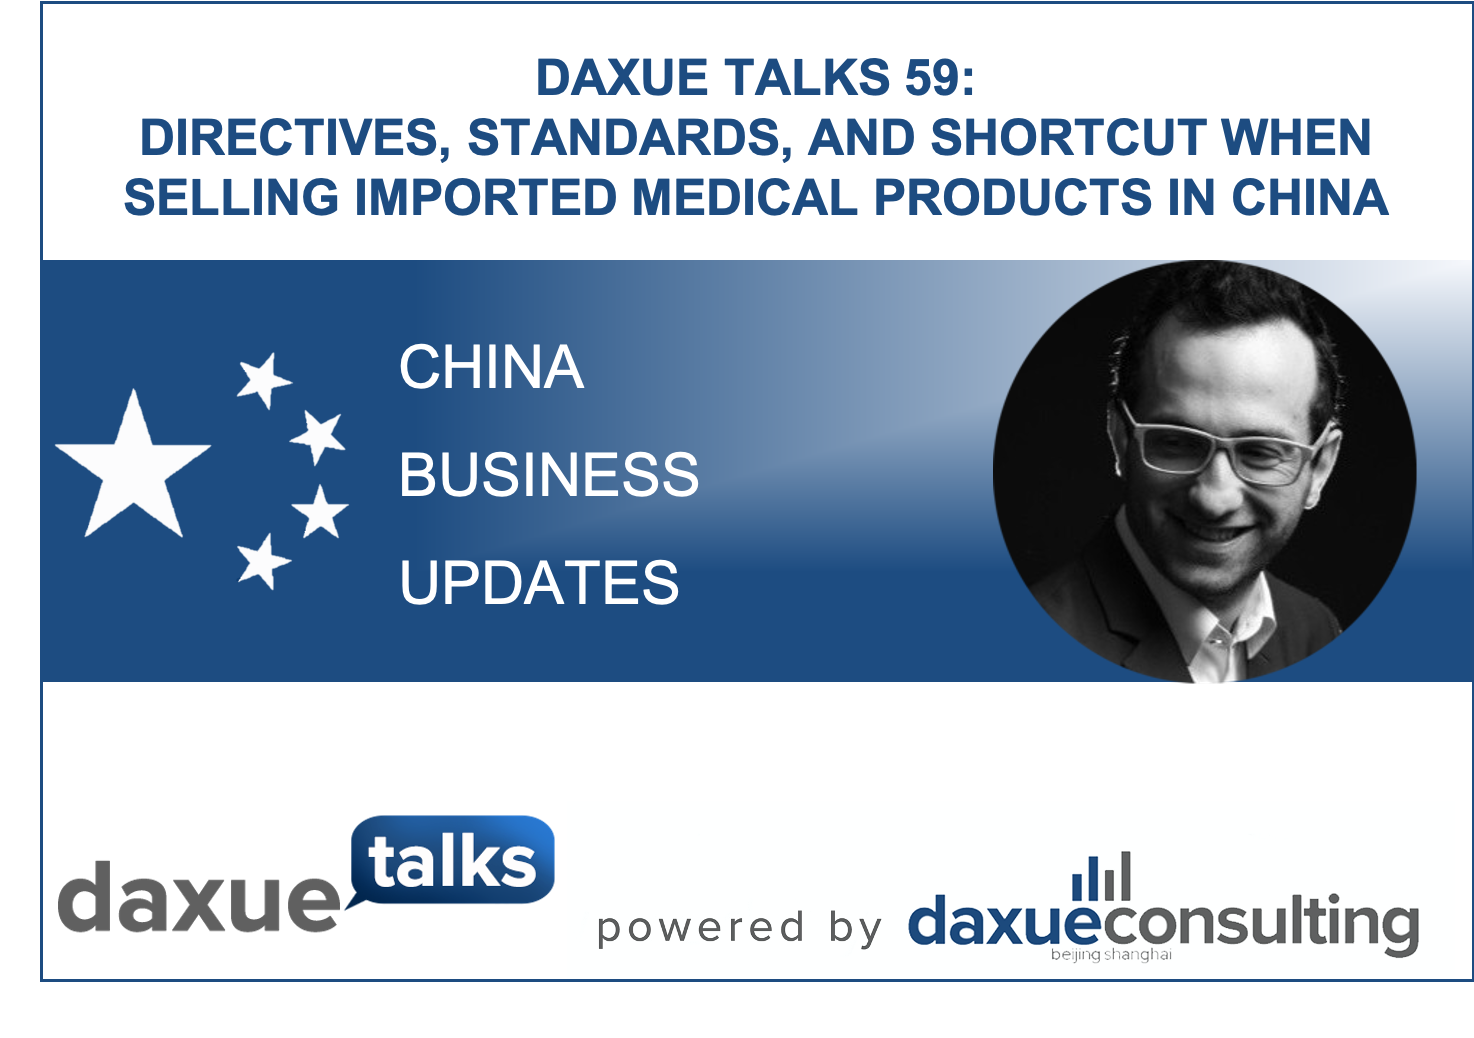 Daxue Talks 59: Directives, standards, and shortcut when selling imported medical products in China